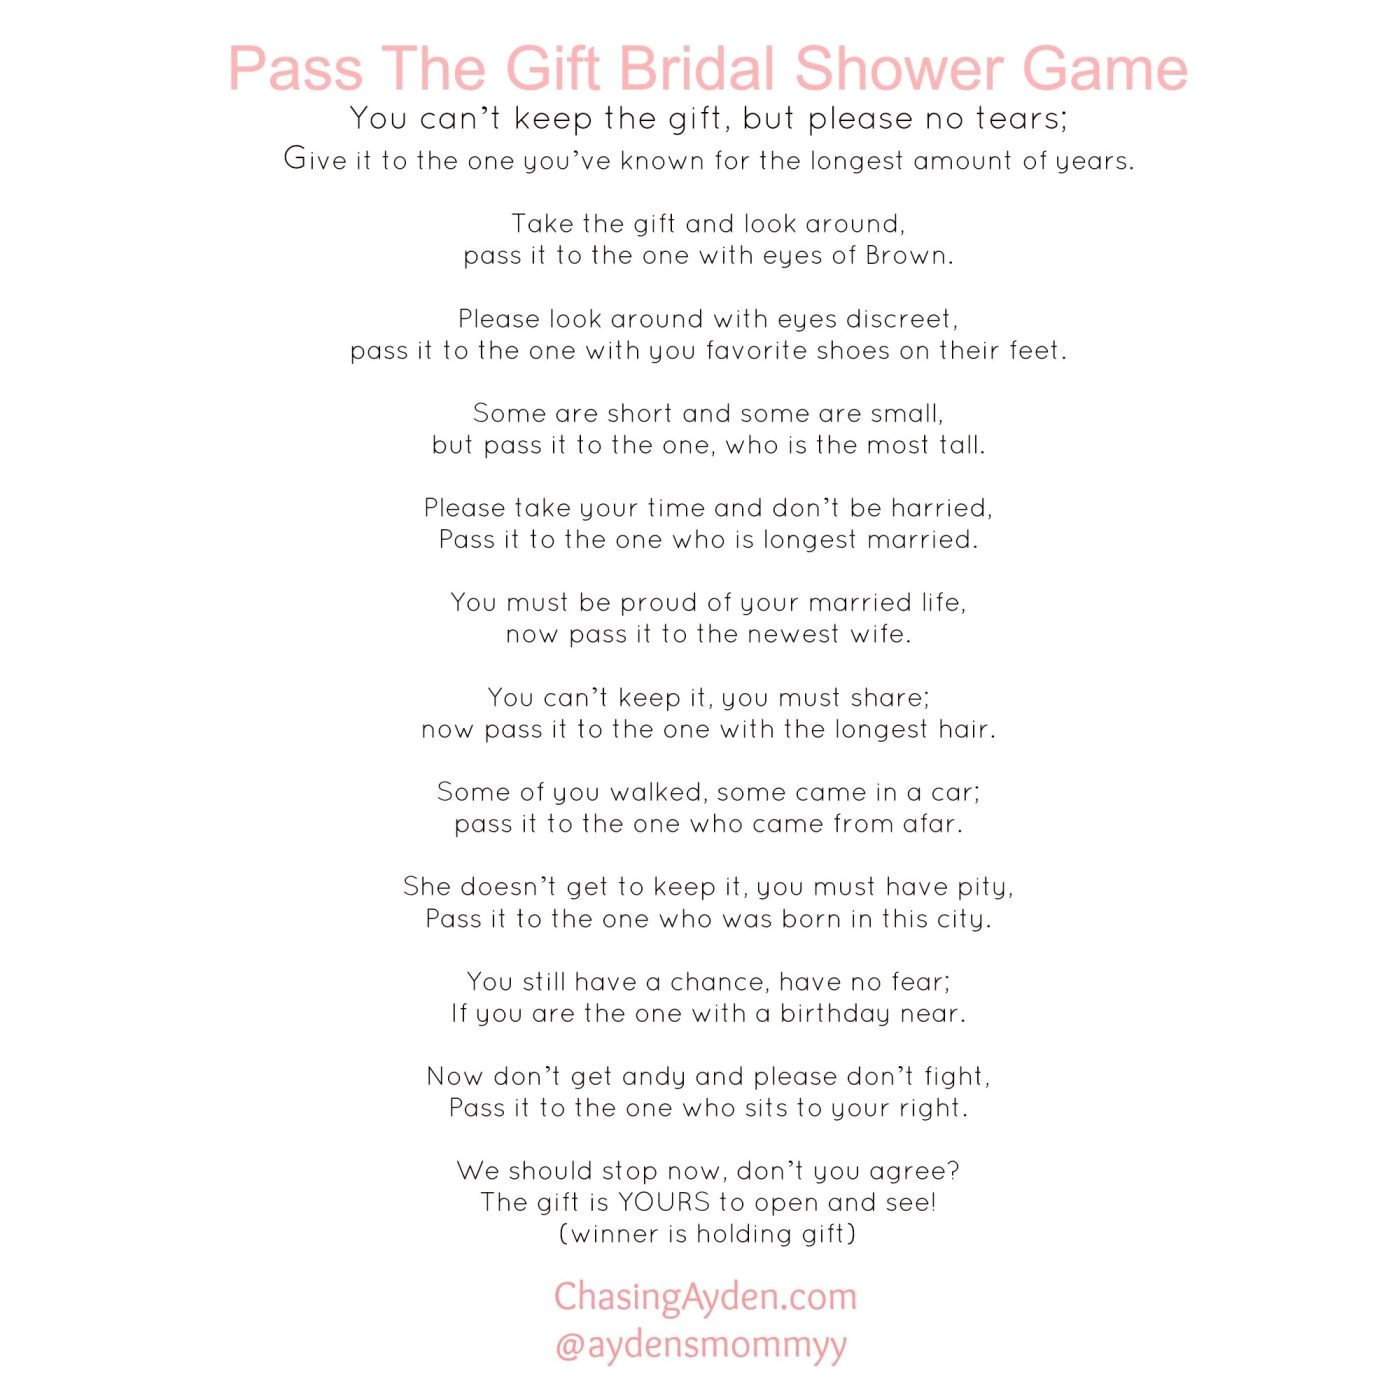 bridal shower poem photos highest quality wedding with cleaning supplies game household gift ideas clothespin 1400